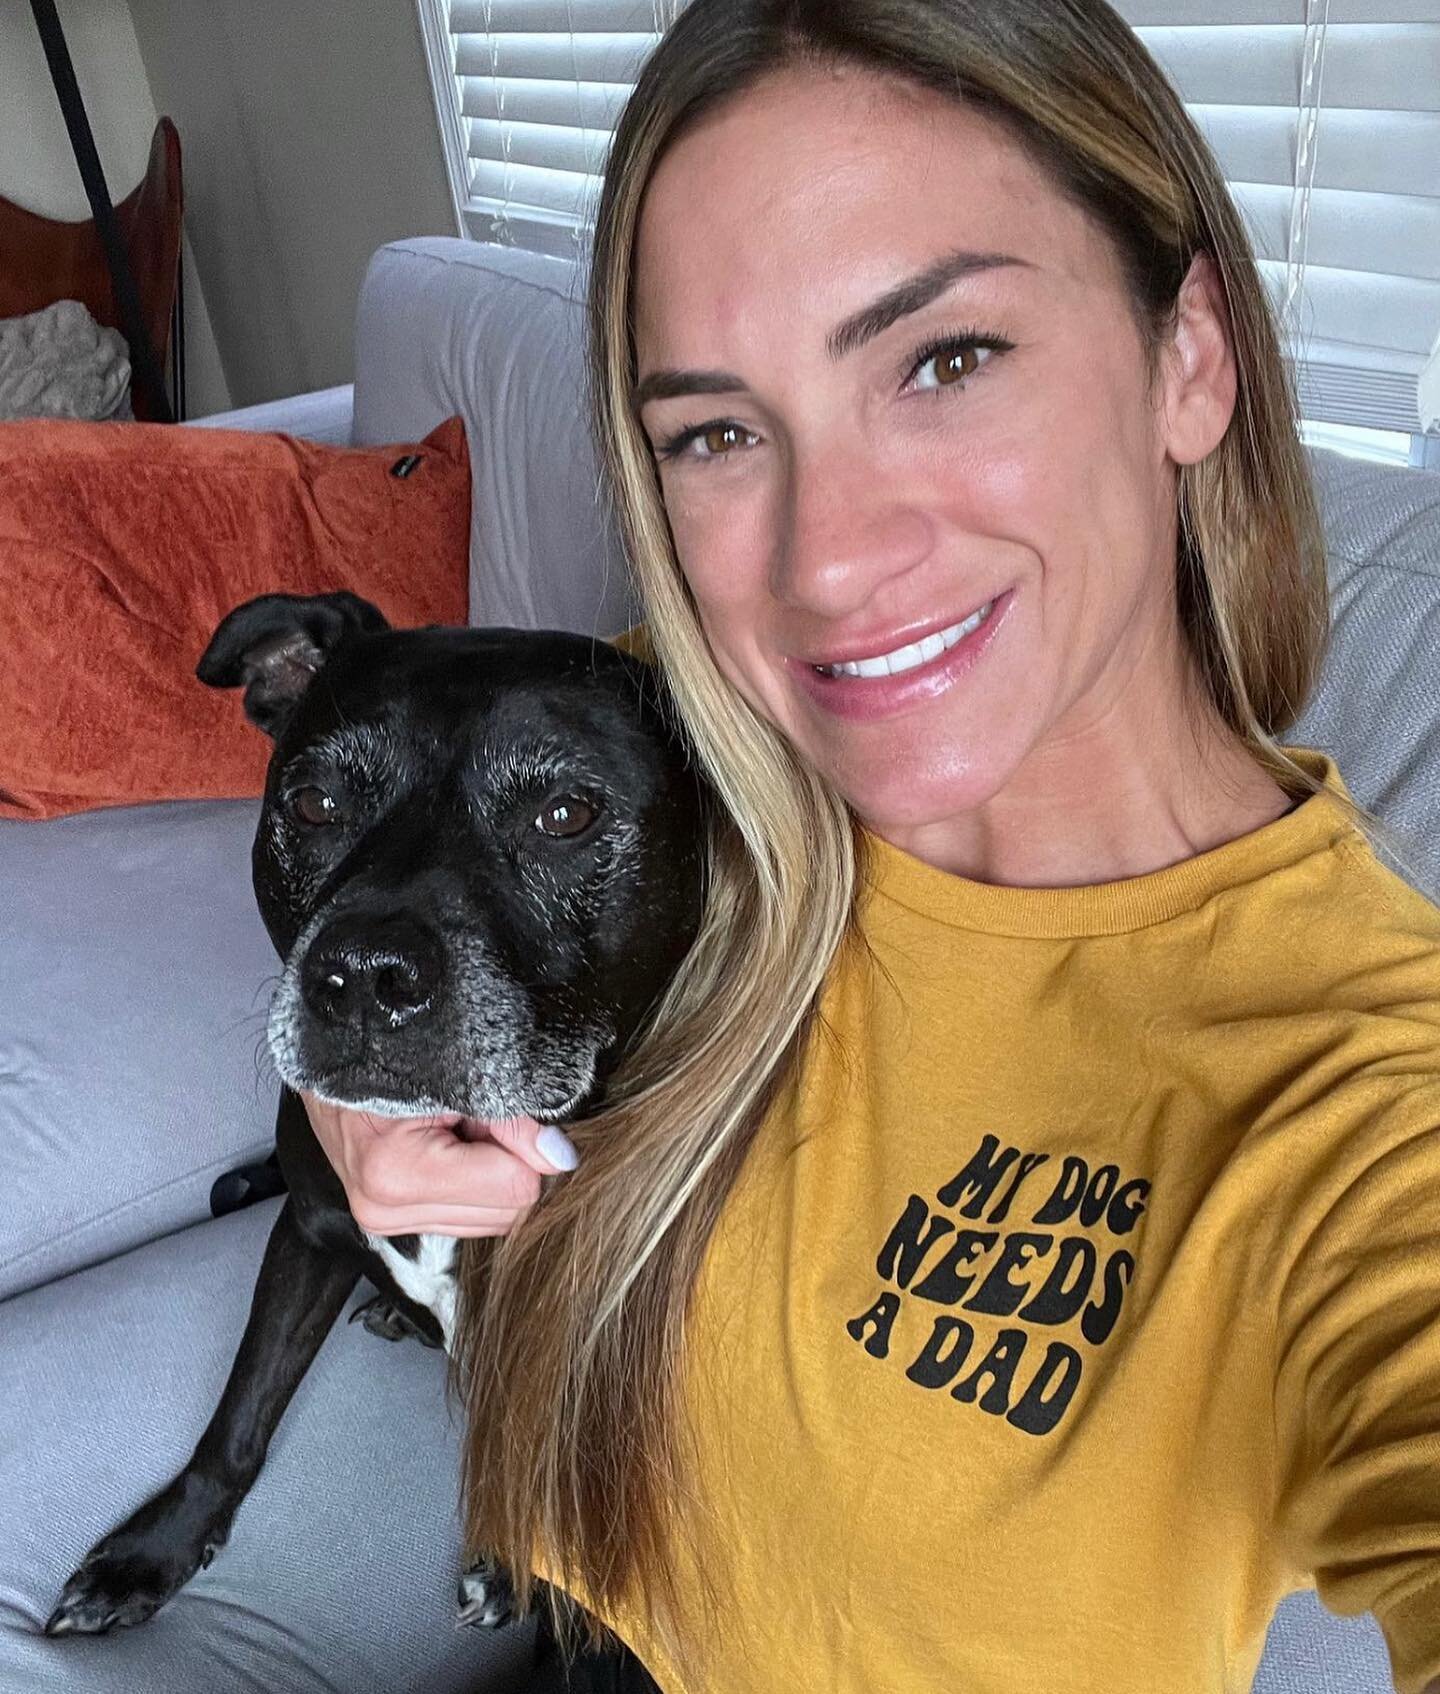 @ulsas5 and her sweet pup Herbie in our favorite kind of selfie! 💁🏻&zwj;♀️🐶❤️

Happy Sunday everyone! ☺️

Remember, today is the last day to enter our latest giveaway! The winner will receive one of our OG Tees, a crop top, AND a trucker hat! We&r